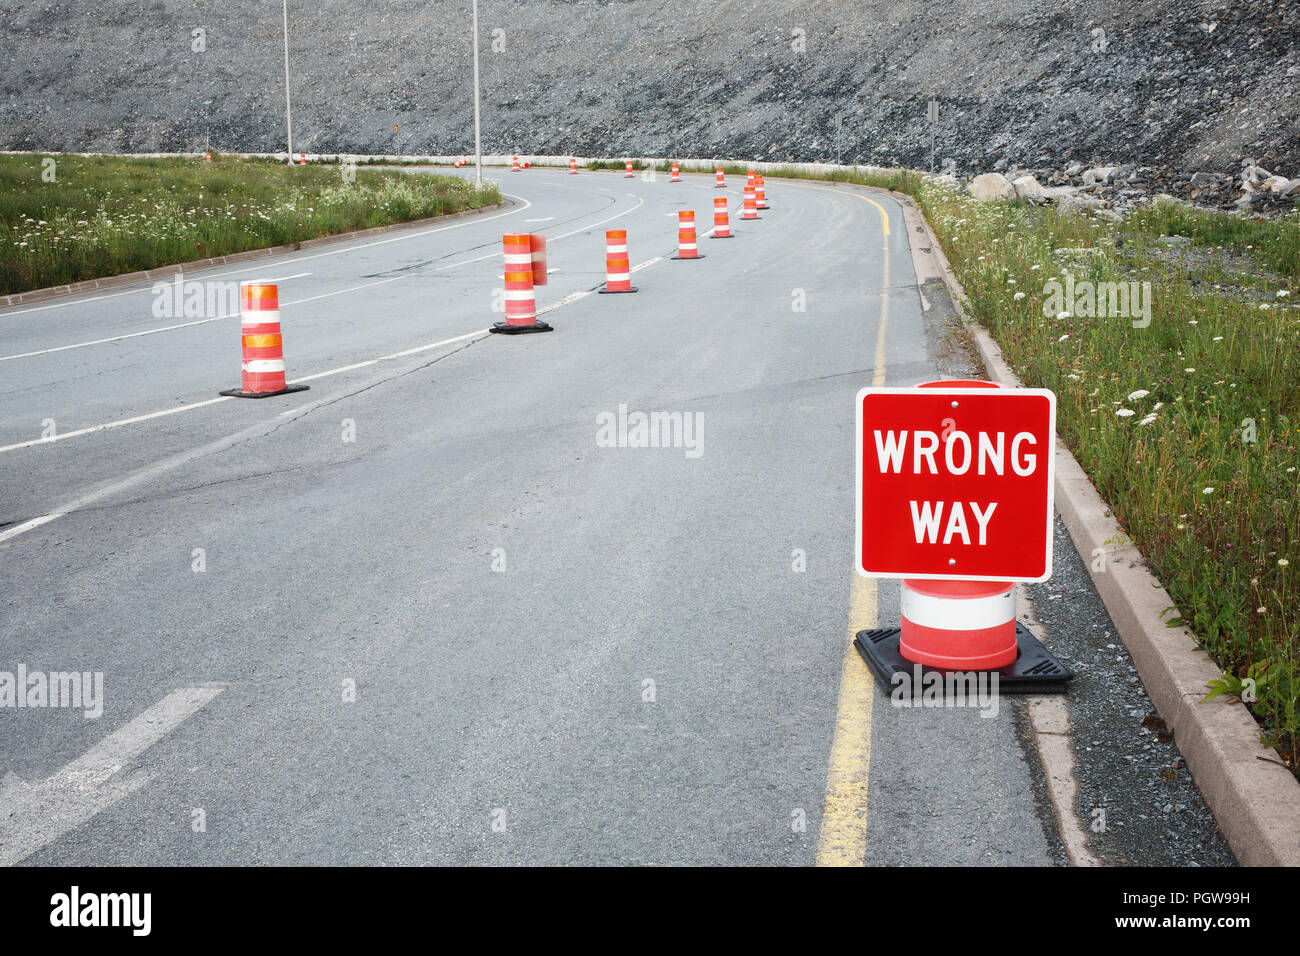 Wrong way traffic sign and safety cones. Stock Photo